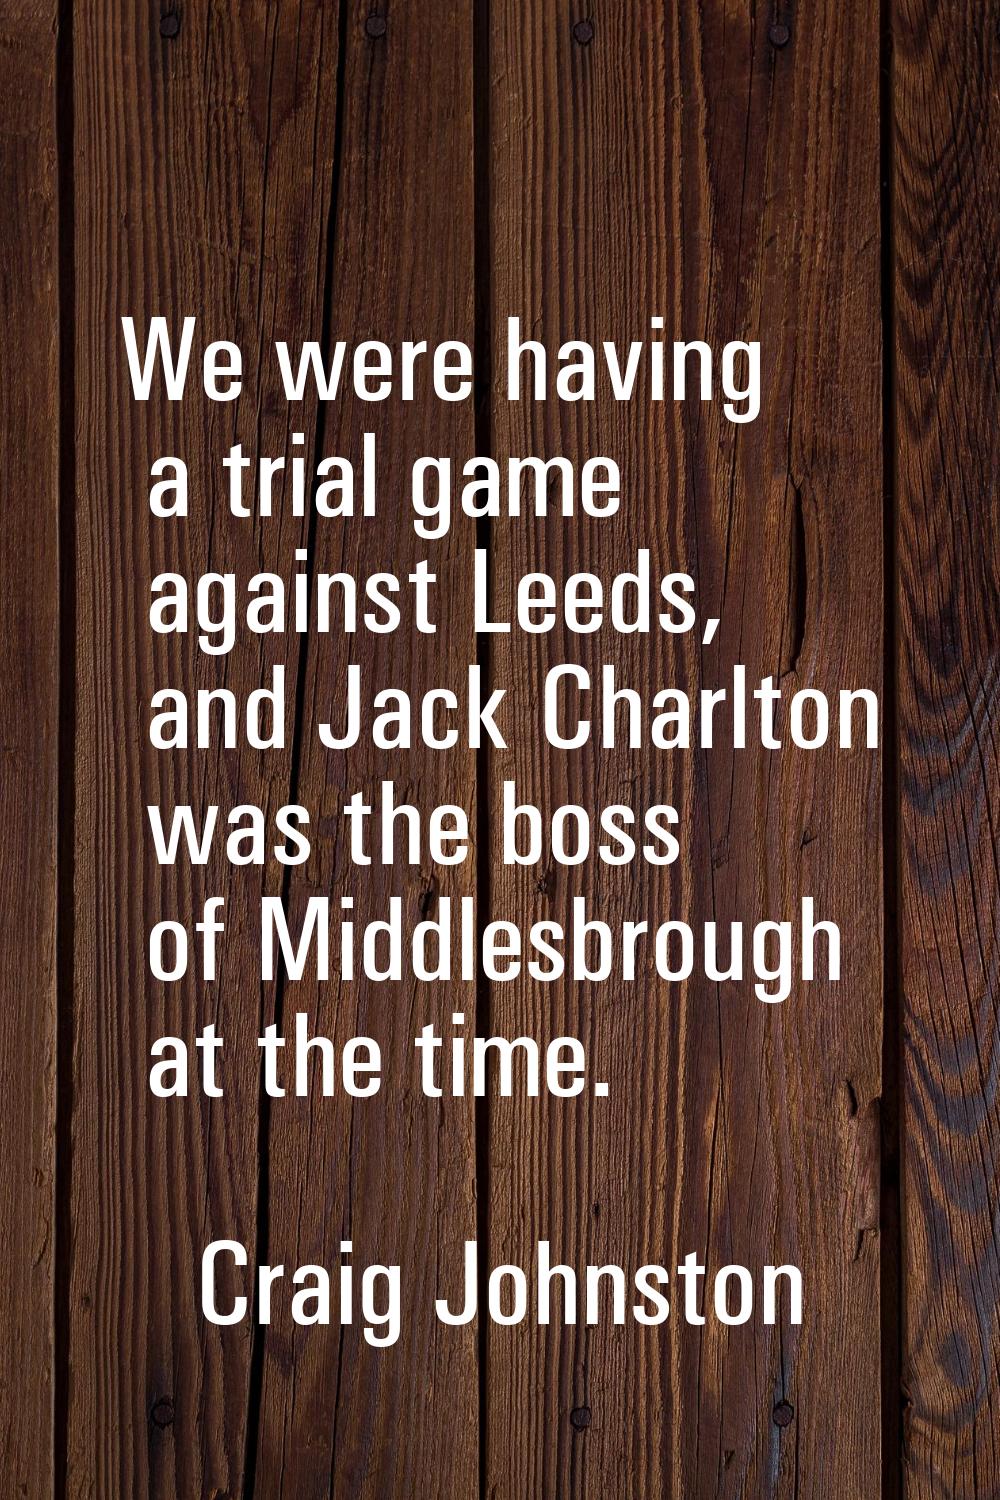 We were having a trial game against Leeds, and Jack Charlton was the boss of Middlesbrough at the t